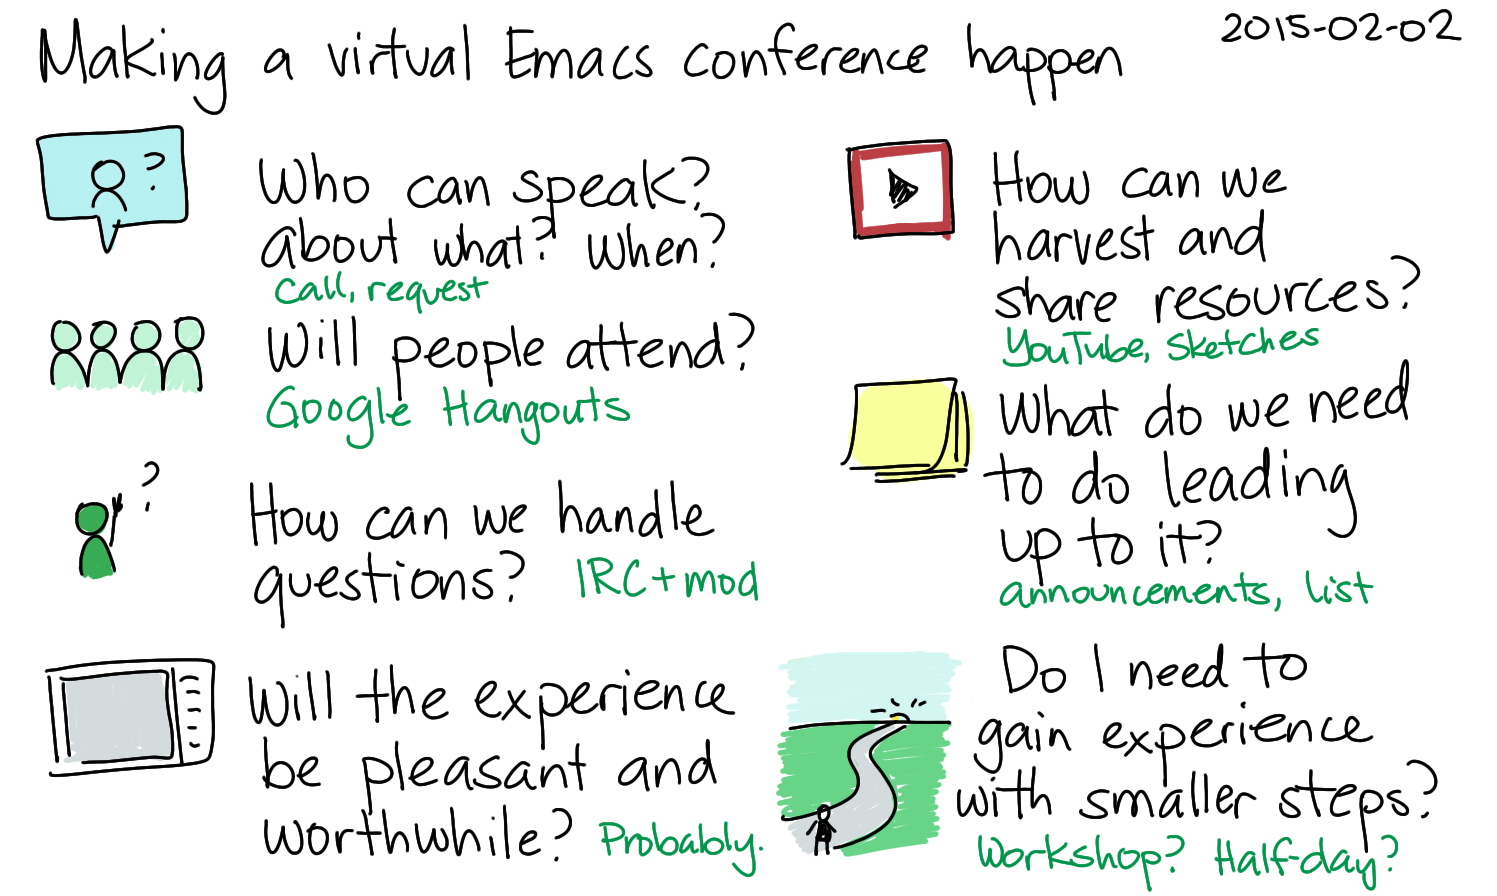 Let’s have a virtual Emacs conference in August help me make it